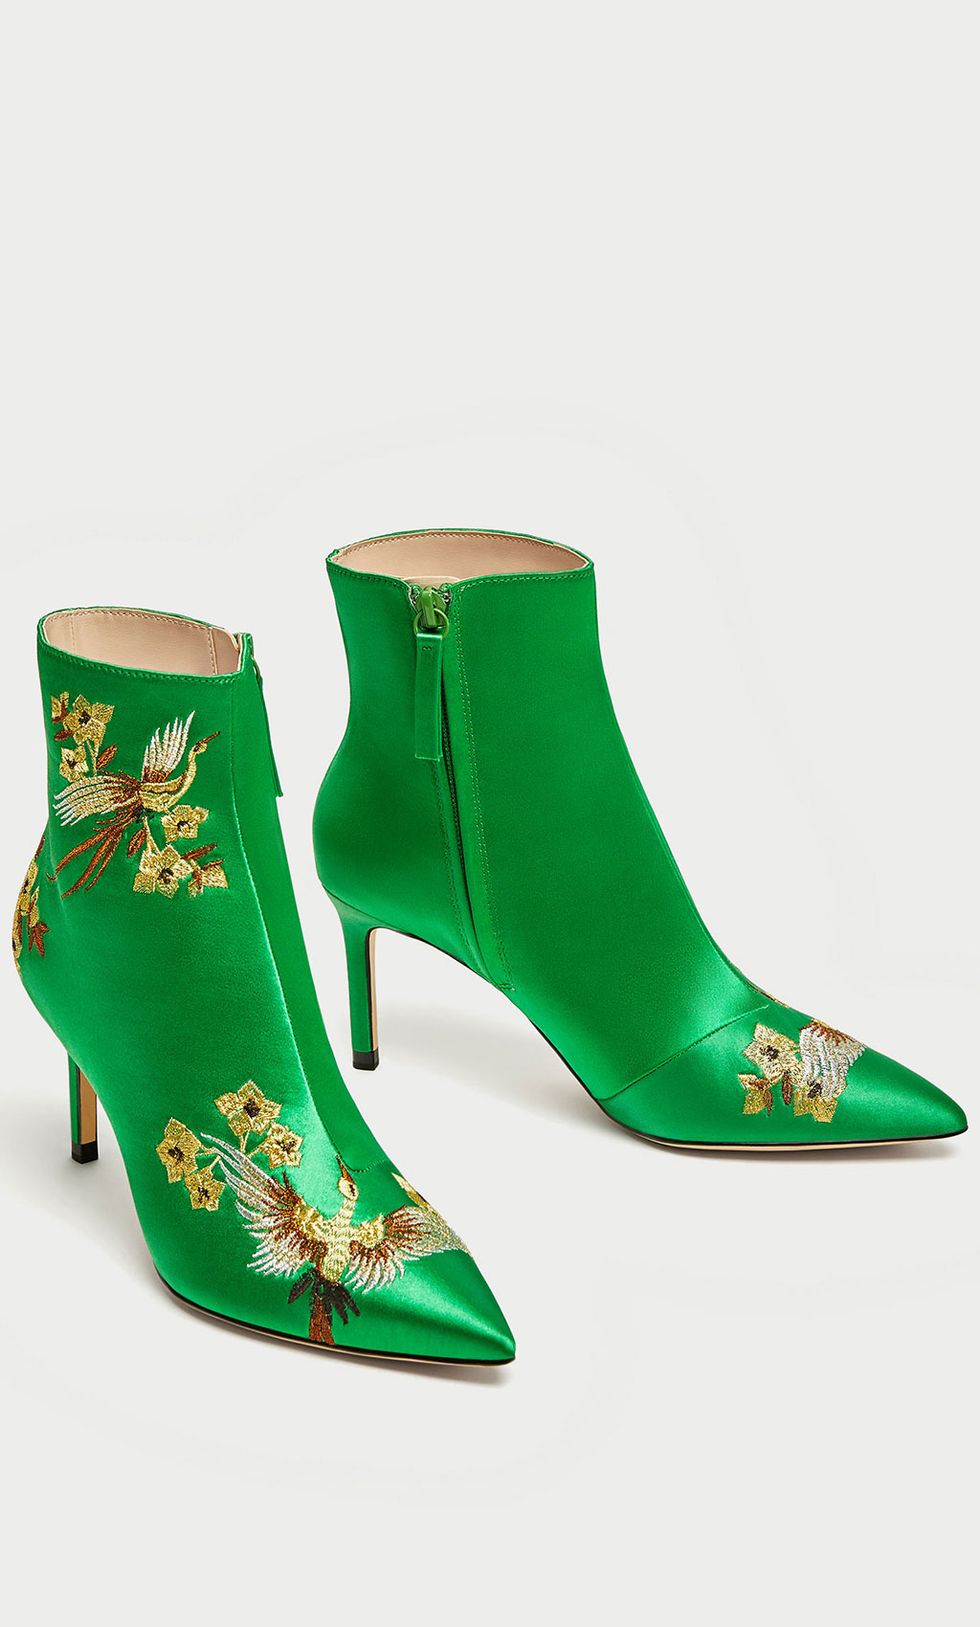 Green, Boot, Fashion, Teal, Leather, Synthetic rubber, Fashion design, High heels, Buckle, 